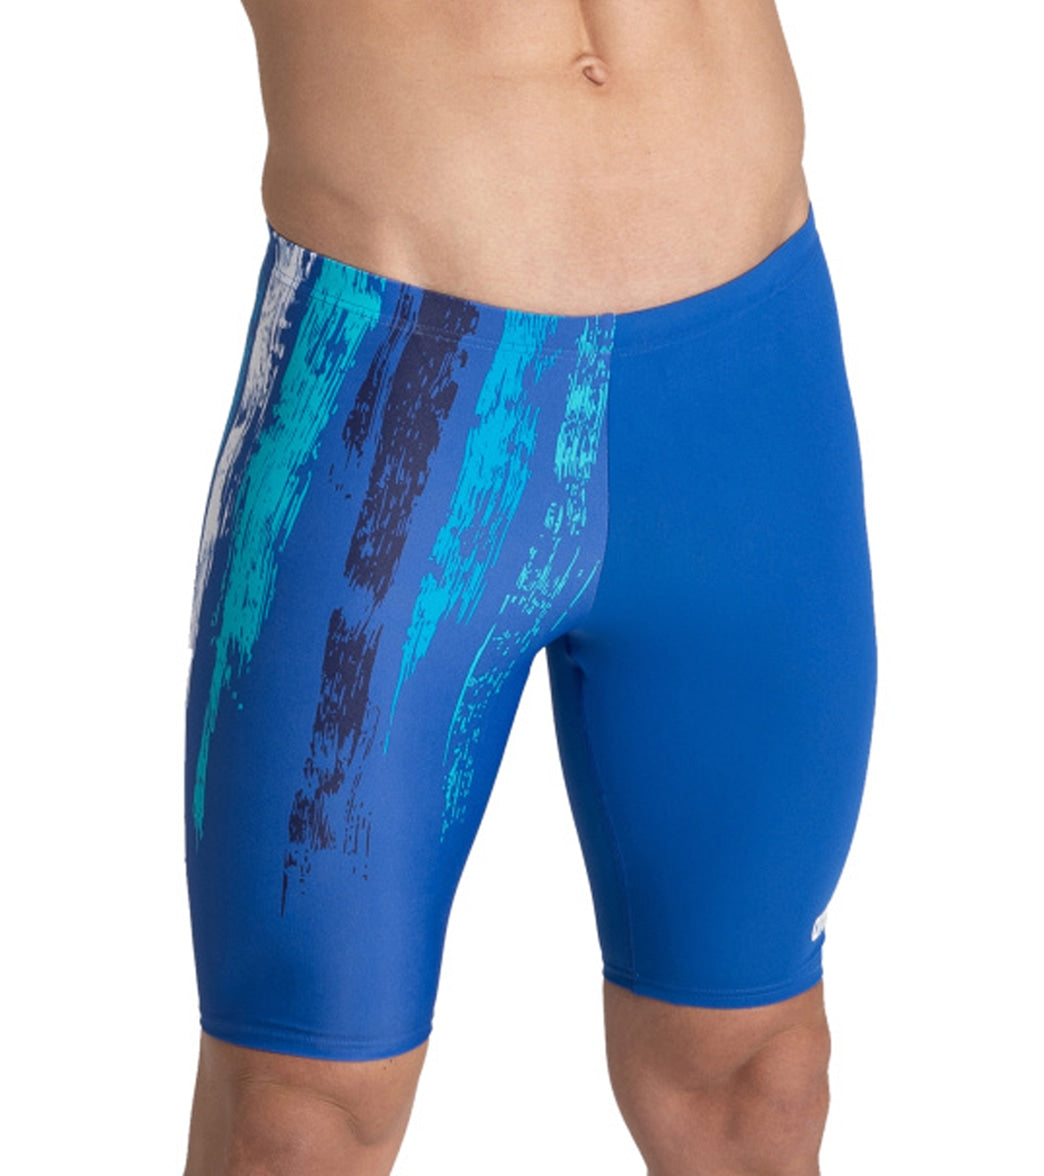 Arena Men's Team Painted Stripes Jammer Swimsuit at SwimOutlet.com